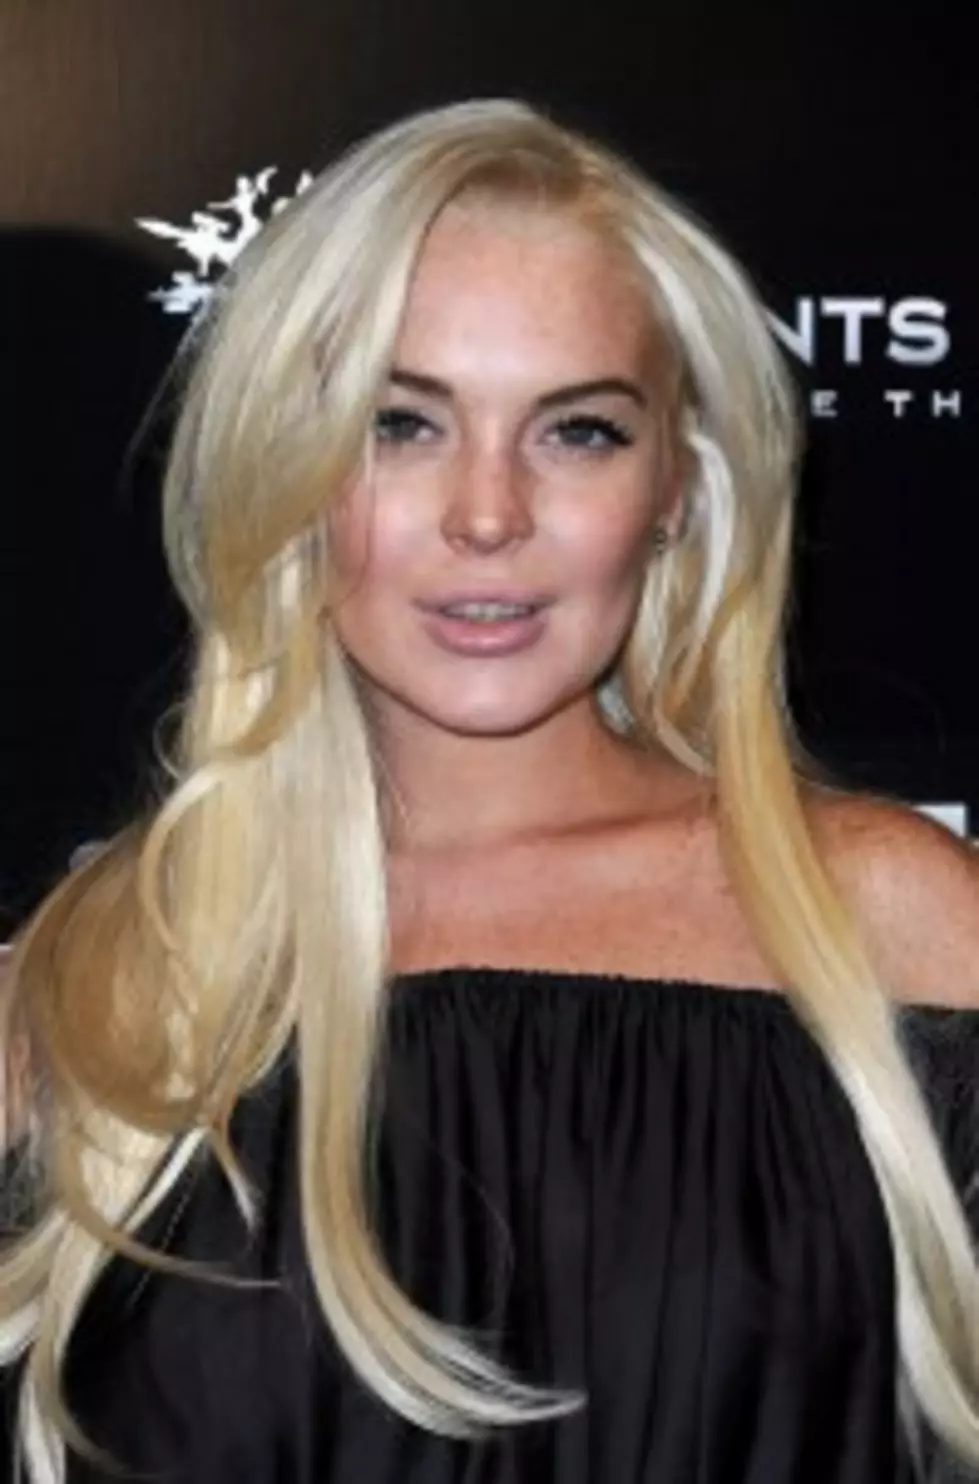 Lindsey Lohan Kicked Out of Community Service